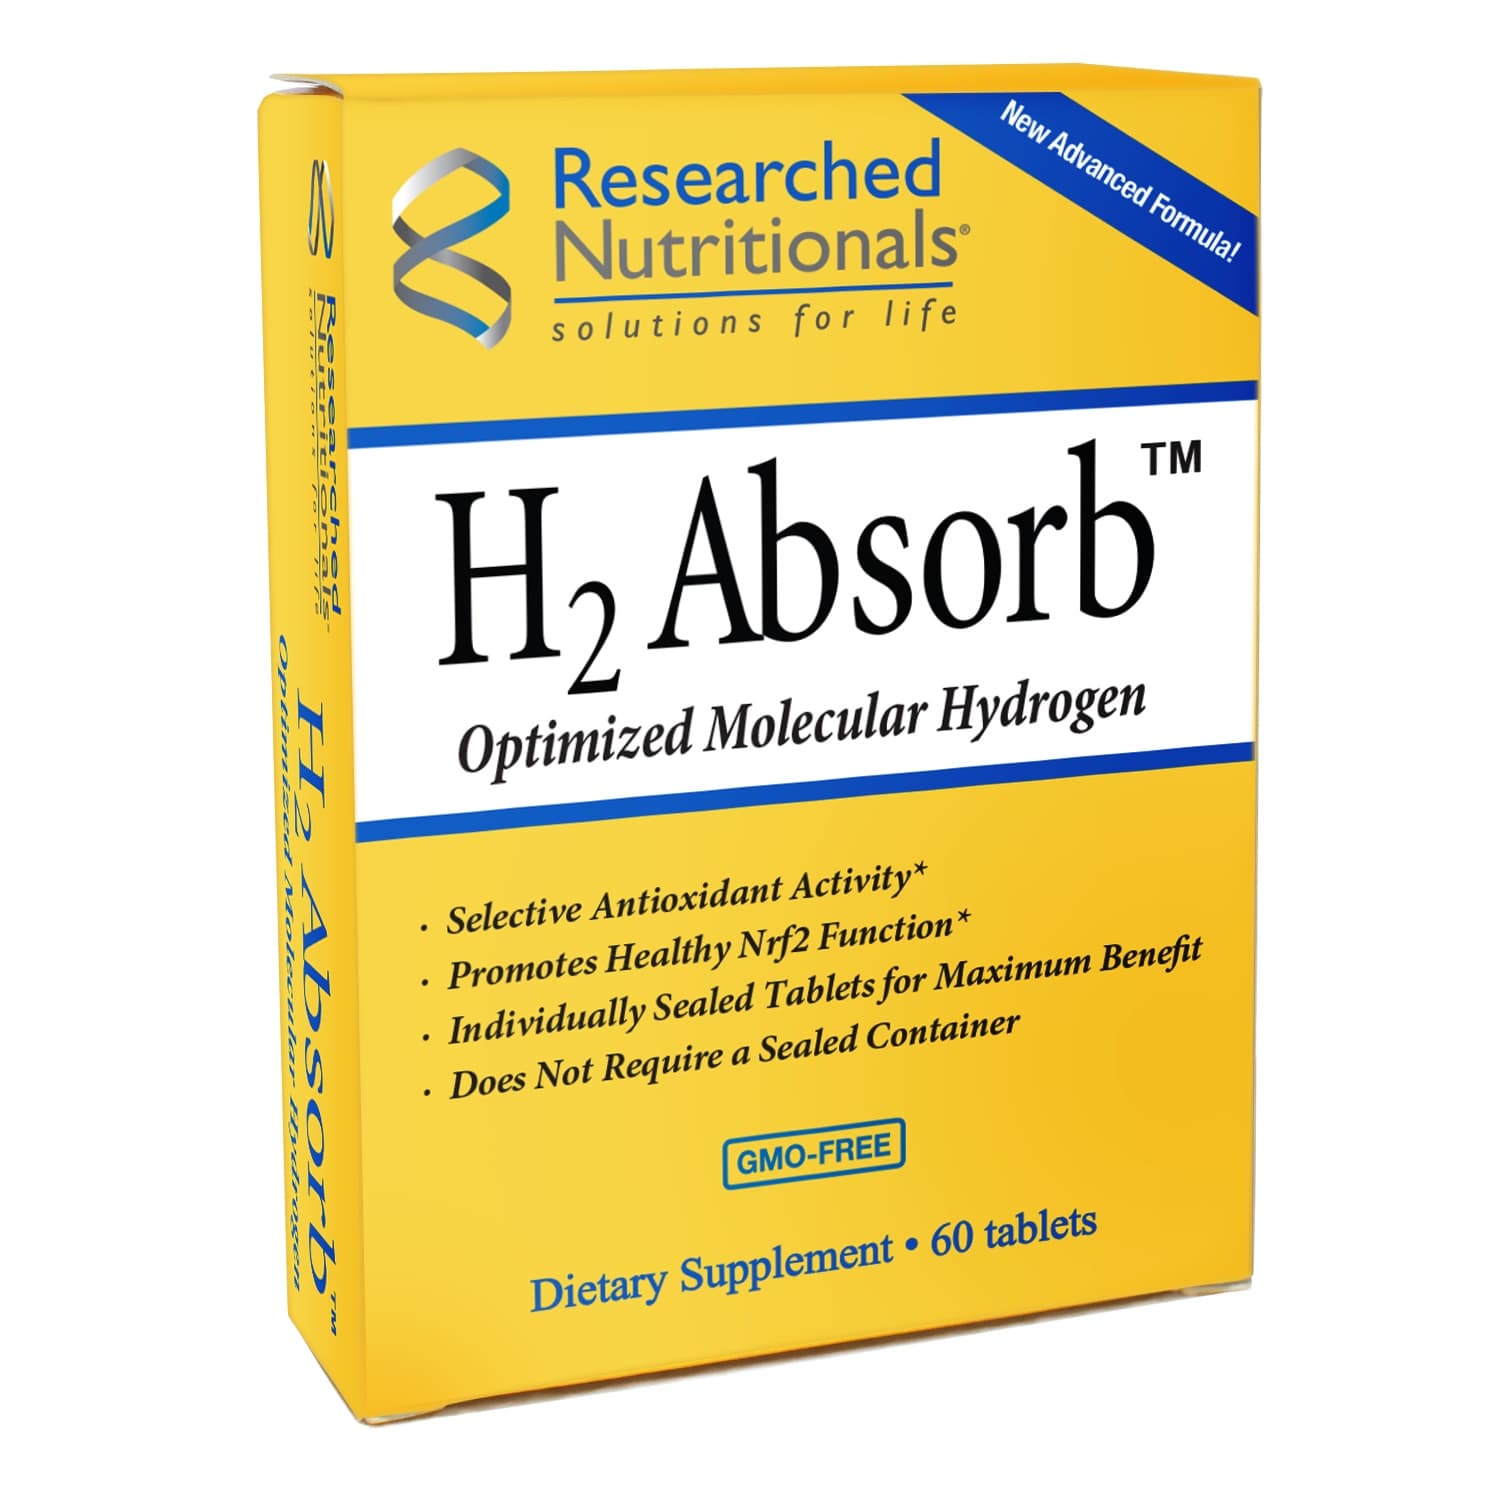 RESEARCHED NUTRITIONALS - H2 Absorb